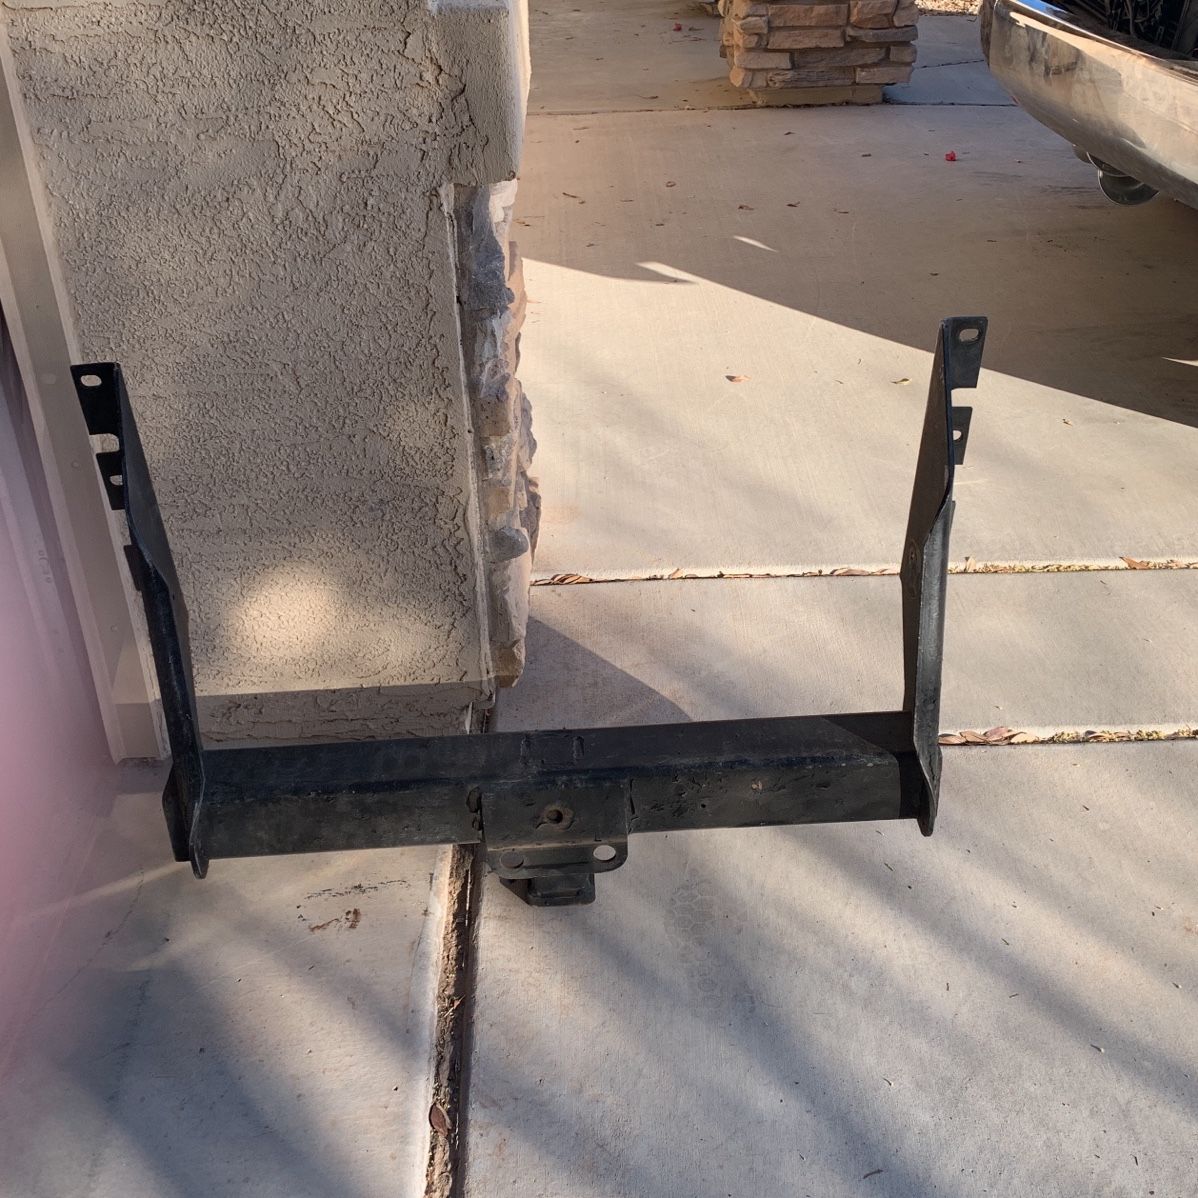 Class 4 Trailer/Tow Hitch - 1996 Chevy C/K 1500